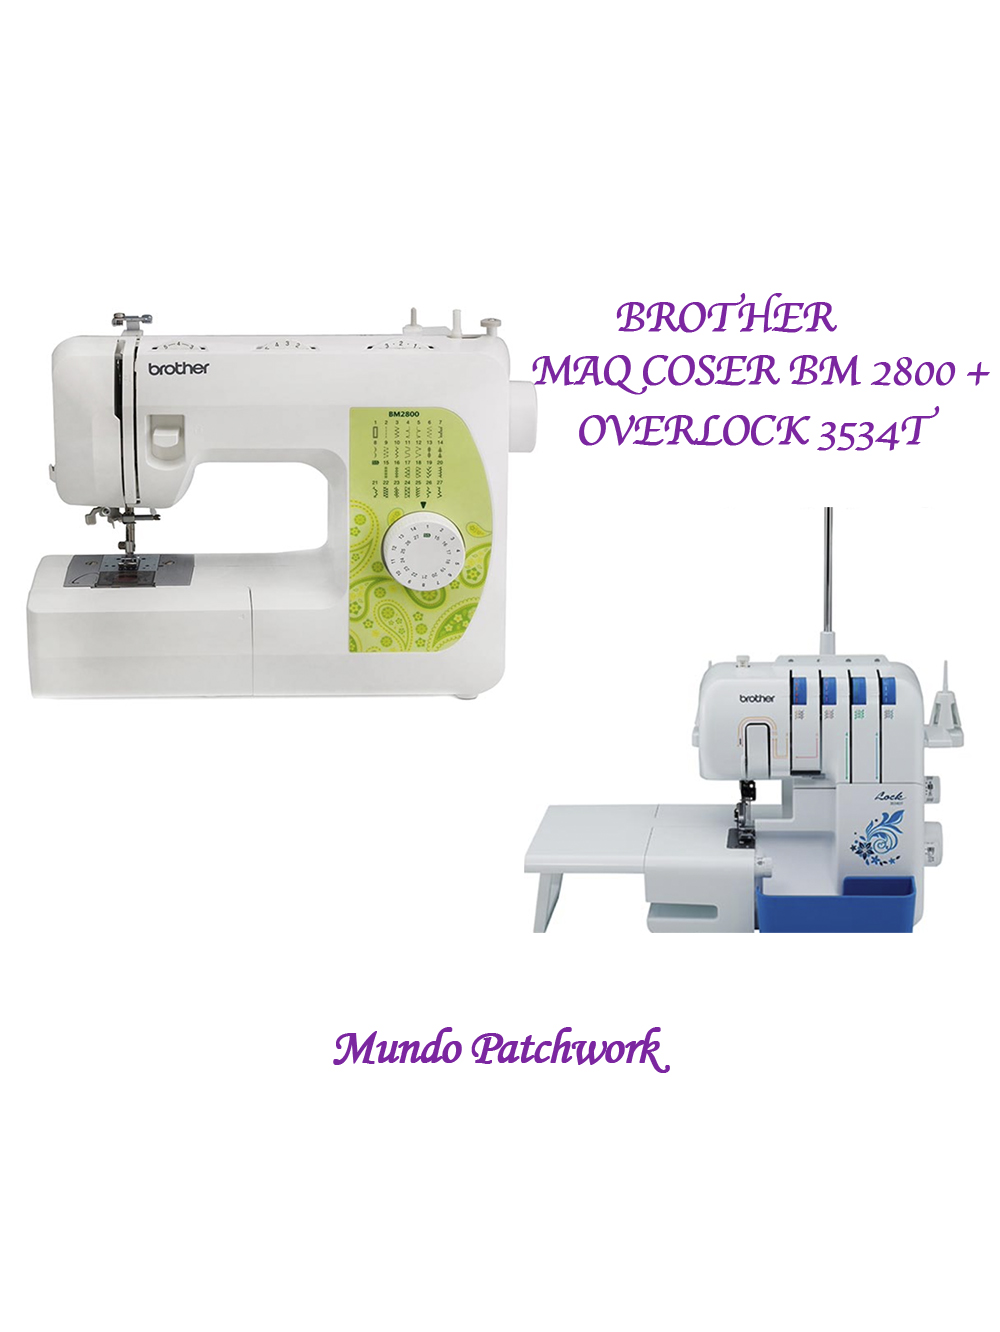 Combo BROTHER 001 -Maquina Coser BM2800 + Overlock 3534T